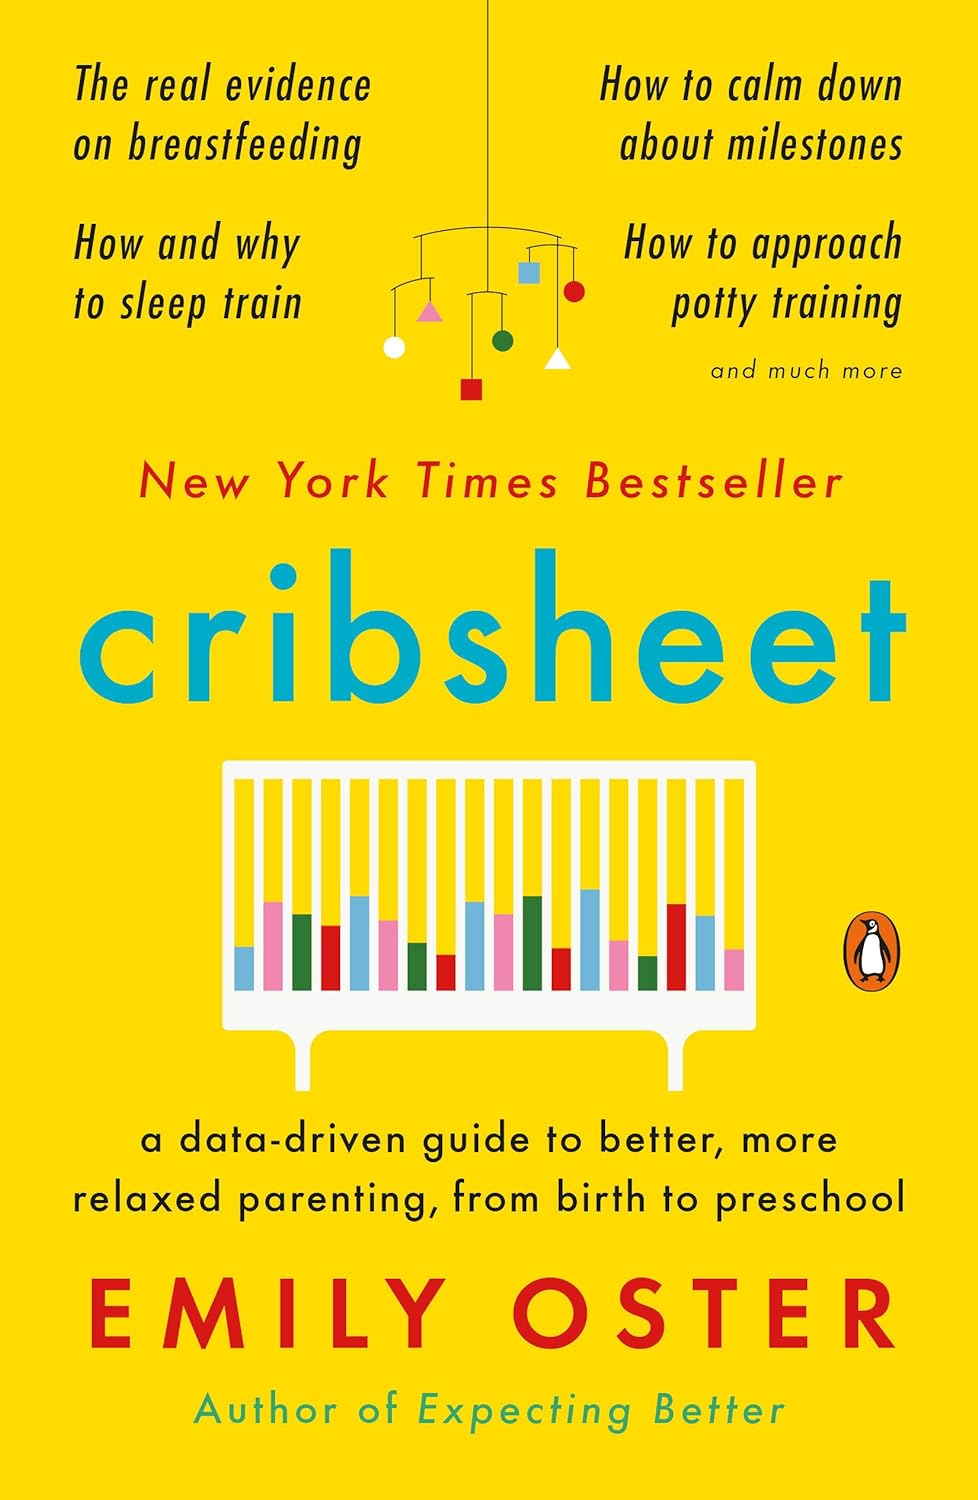 Cribsheet by Emily Oster